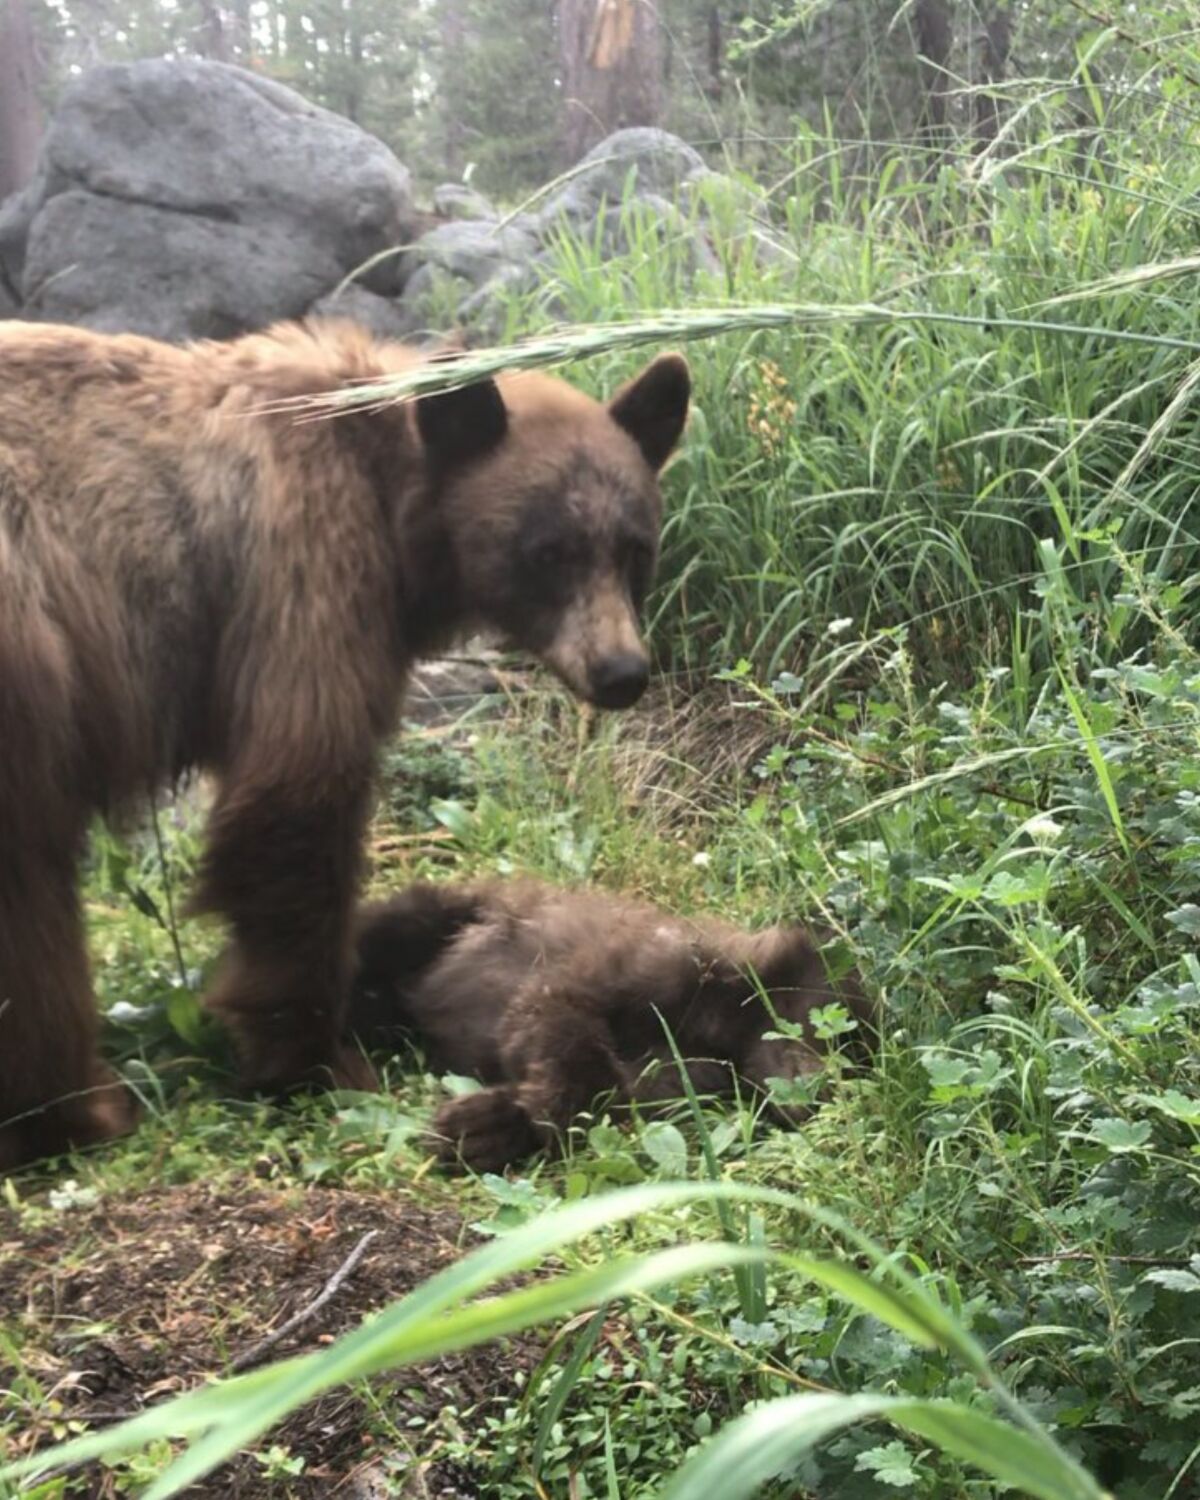 A dead bear cub and its mother in Yosemite National Park